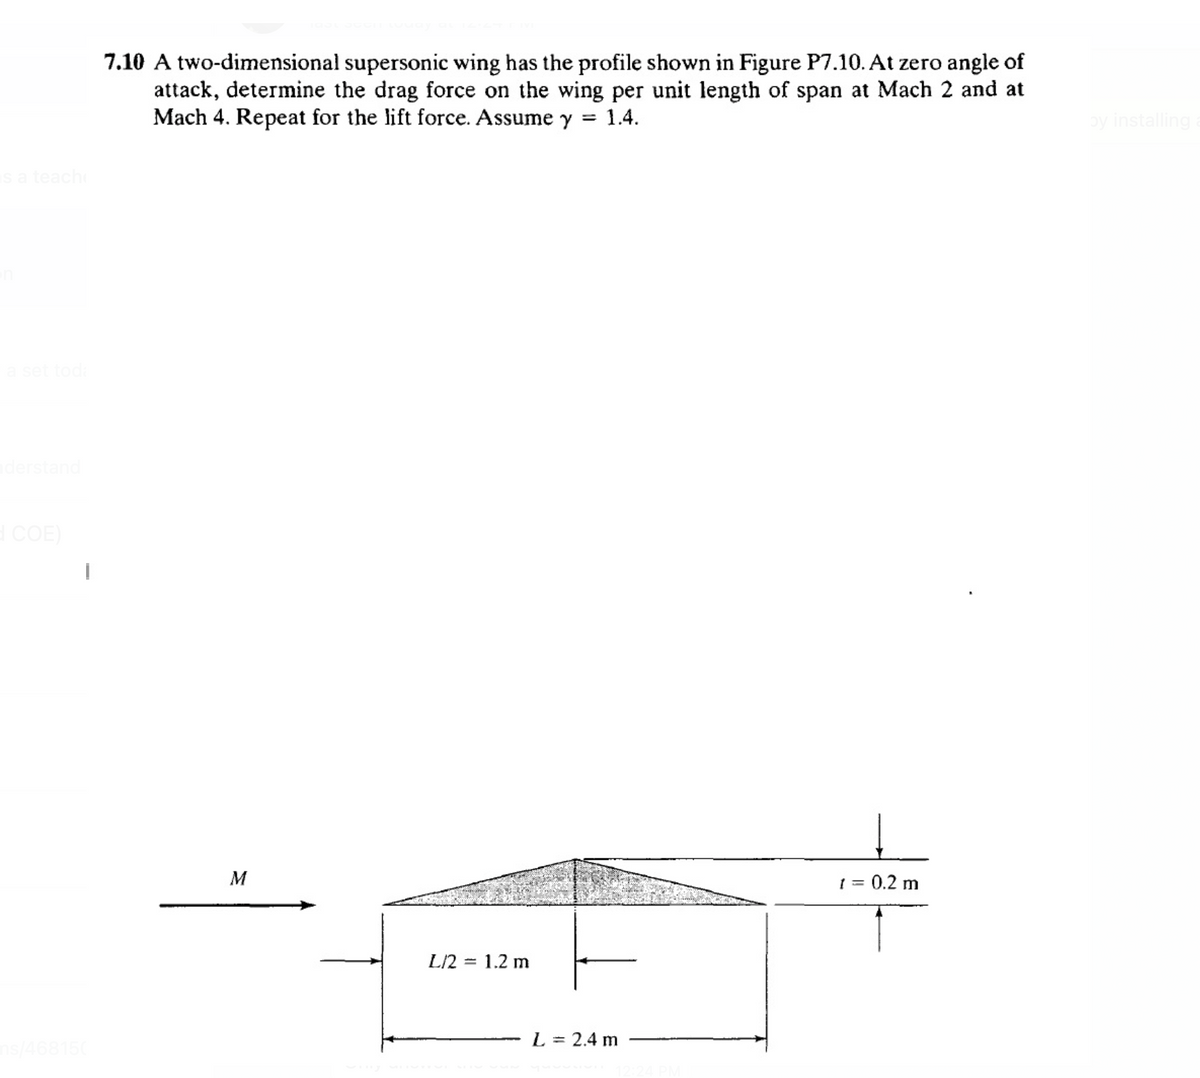 7.10 A two-dimensional supersonic wing has the profile shown in Figure P7.10. At zero angle of
attack, determine the drag force on the wing per unit length of span at Mach 2 and at
Mach 4. Repeat for the lift force. Assume y = 1.4.
by installing
sa teach
COE)
M
1 = 0.2 m
L/2
1.2 m
%3|
L = 2.4 m
